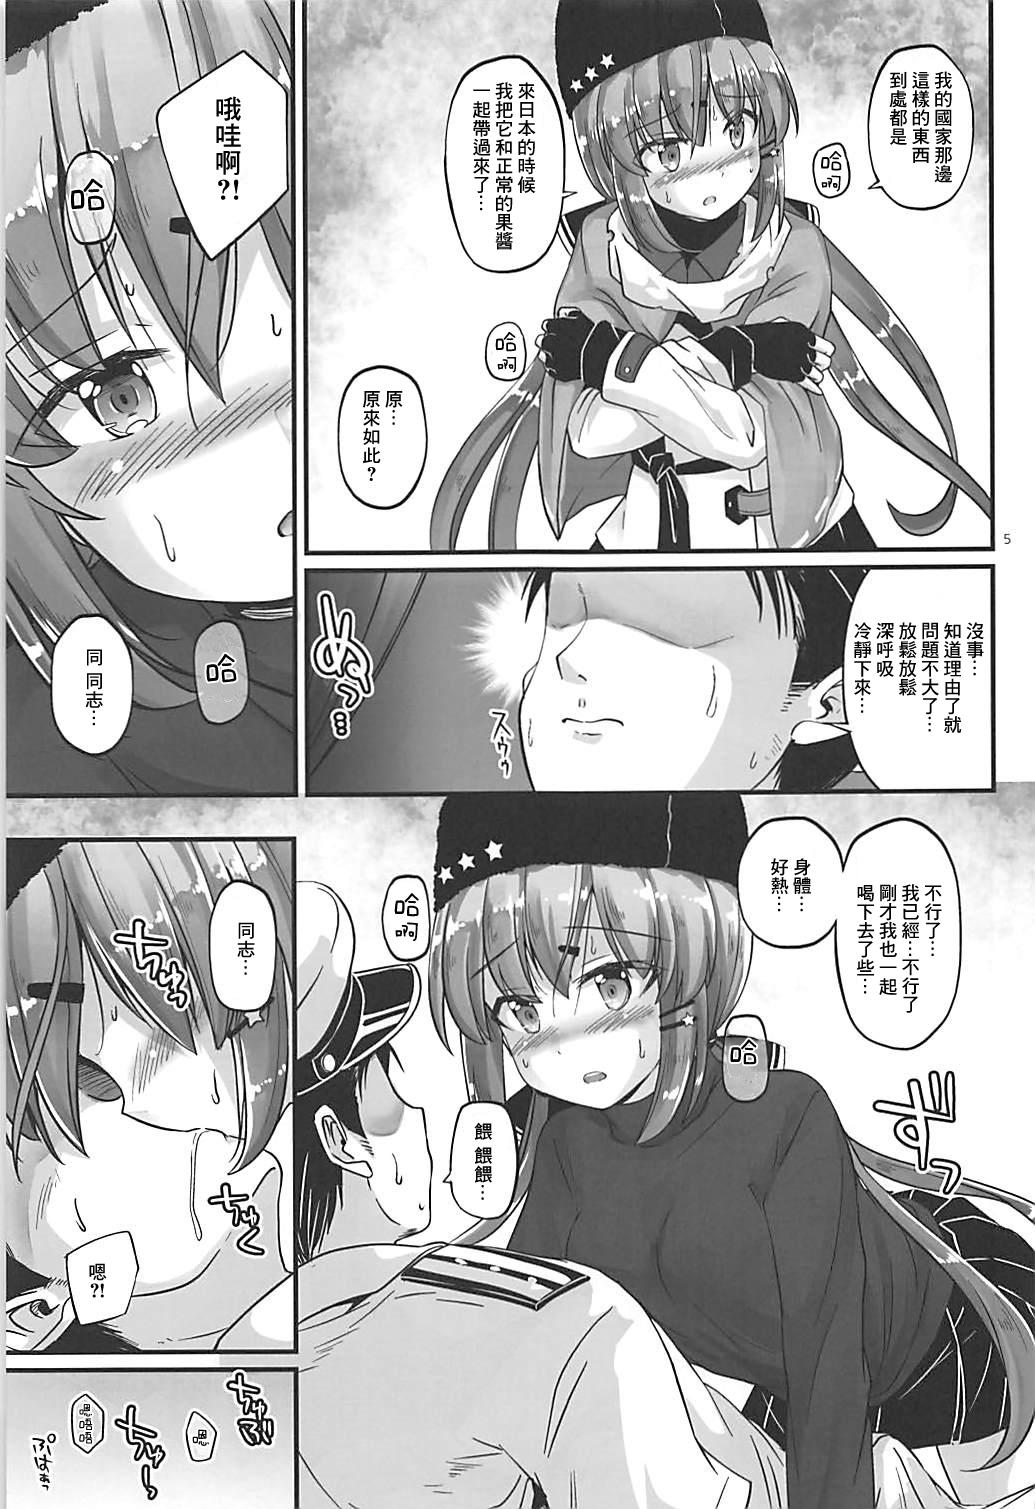 Snatch Sorairo Fairy - Kantai collection Pounded - Page 4